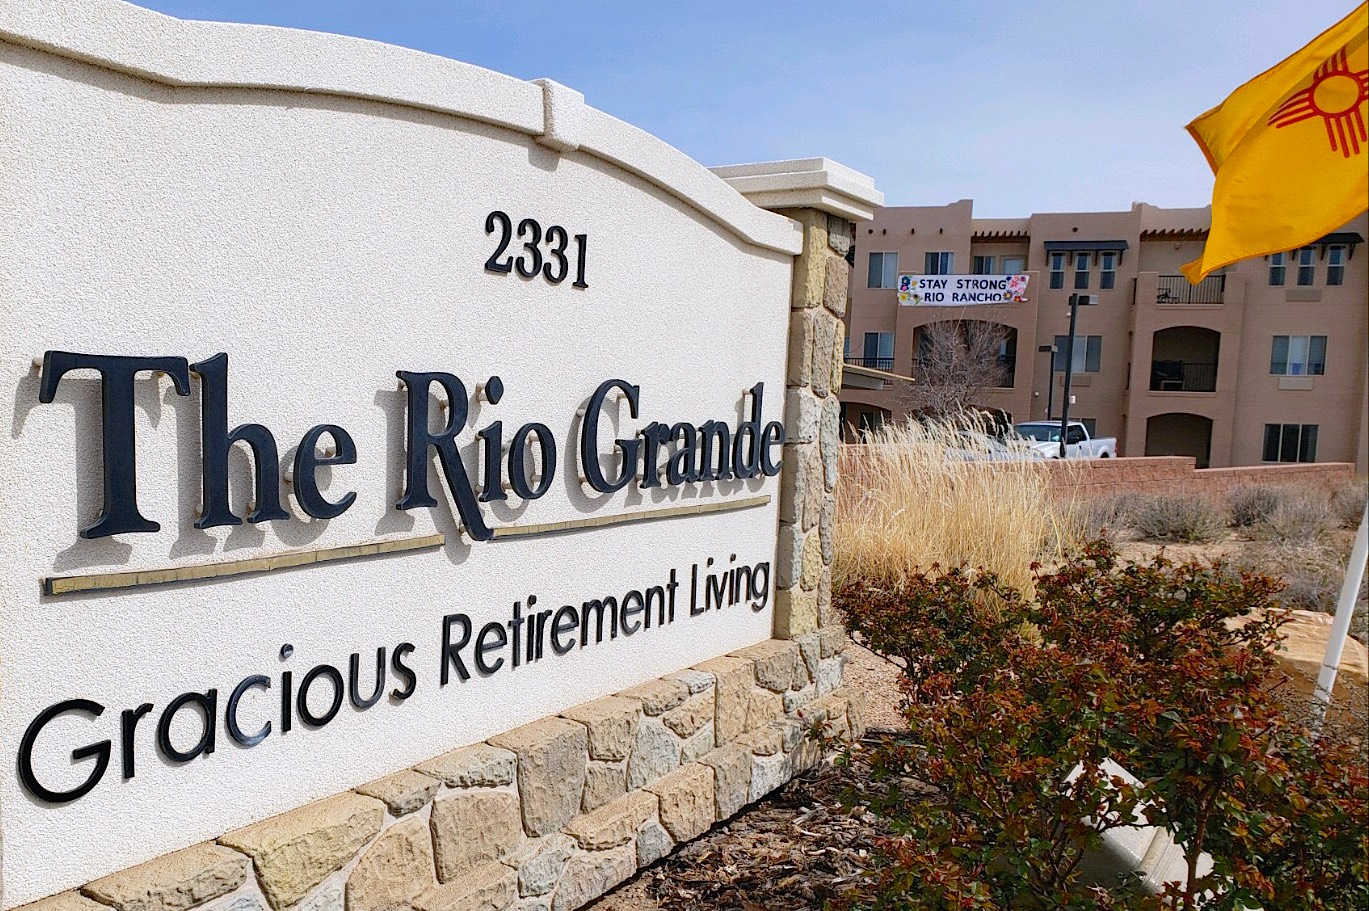 Rio Rancho retirement community on lockdown after resident tests positive for COVID-19